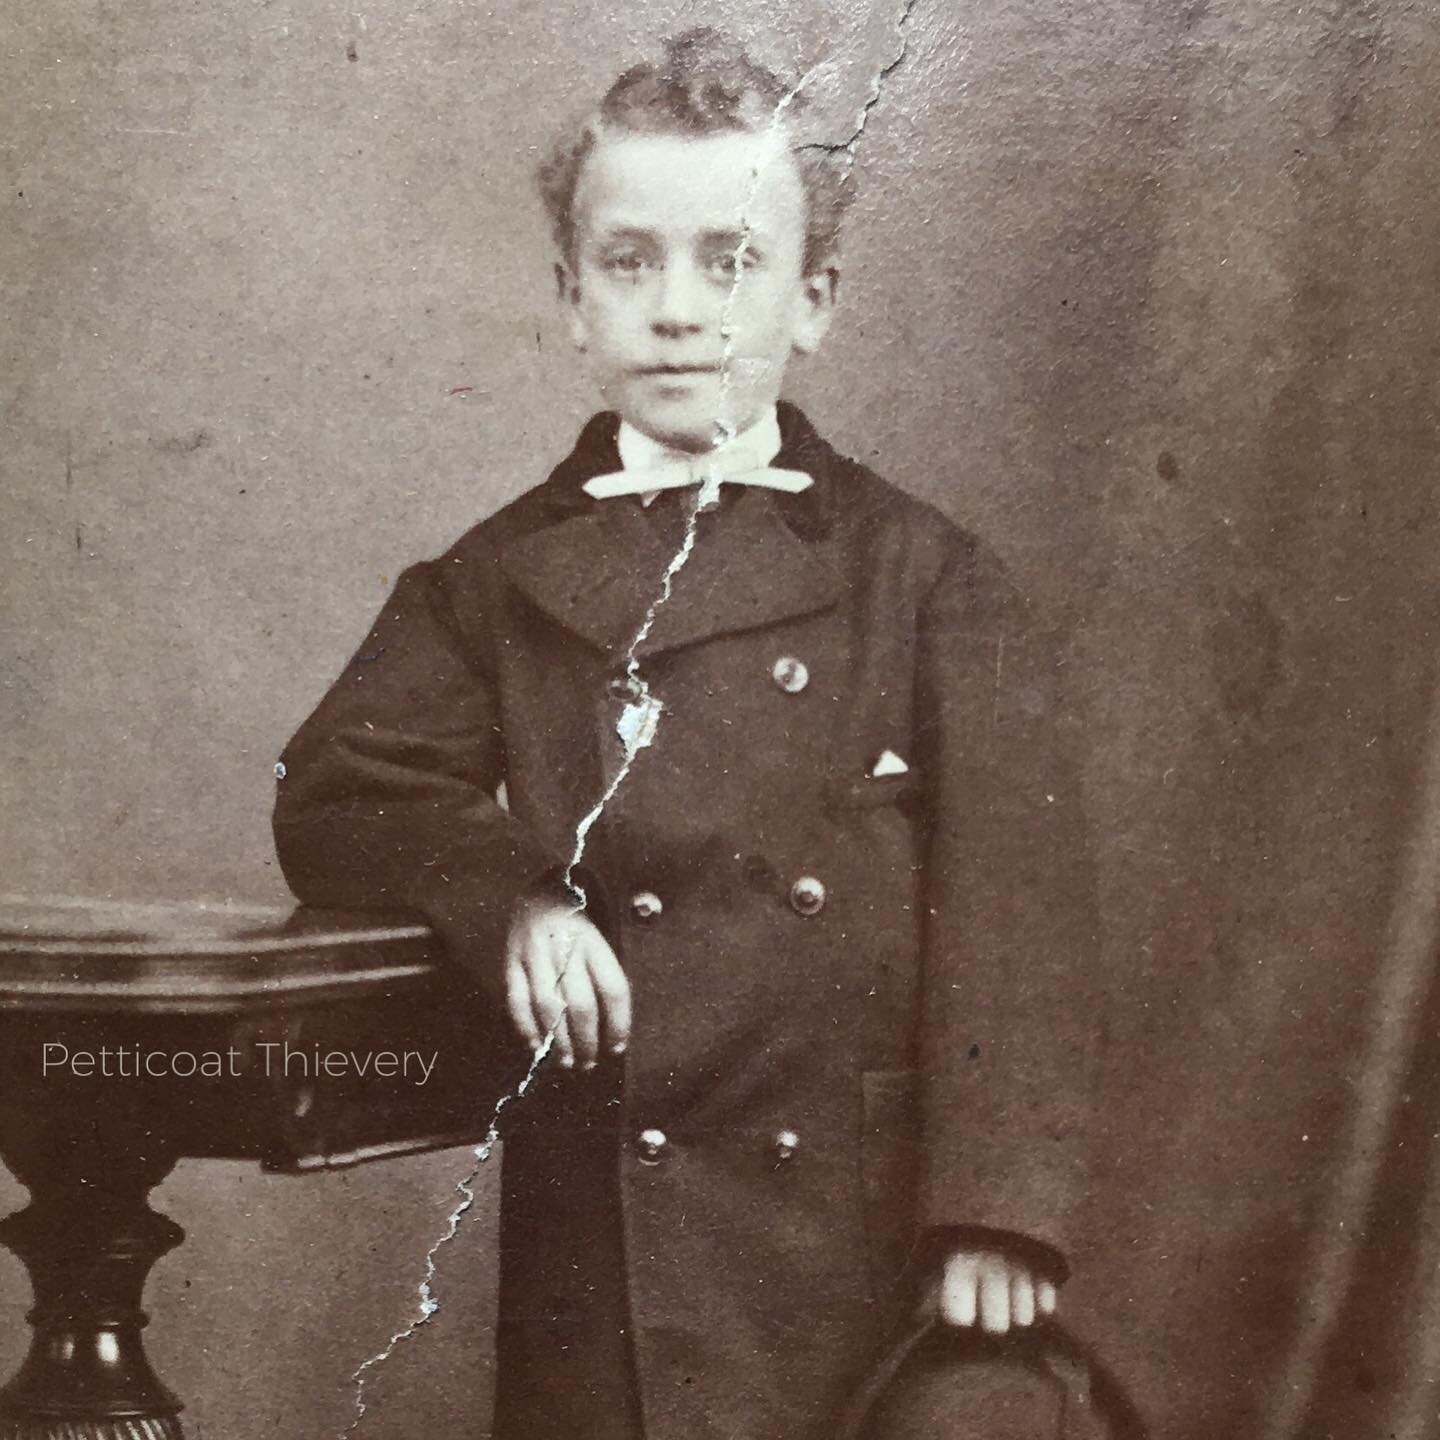 Dapper young lad. Check out the bow tie, the slightly oversized double-breasted overcoat with pocket square, and those striped socks 
.
.
.
.
Circa mid- to late-nineteenth century
.
.
.
#vintage #vintagefashion #vintagestyle #vintagephotography #phot